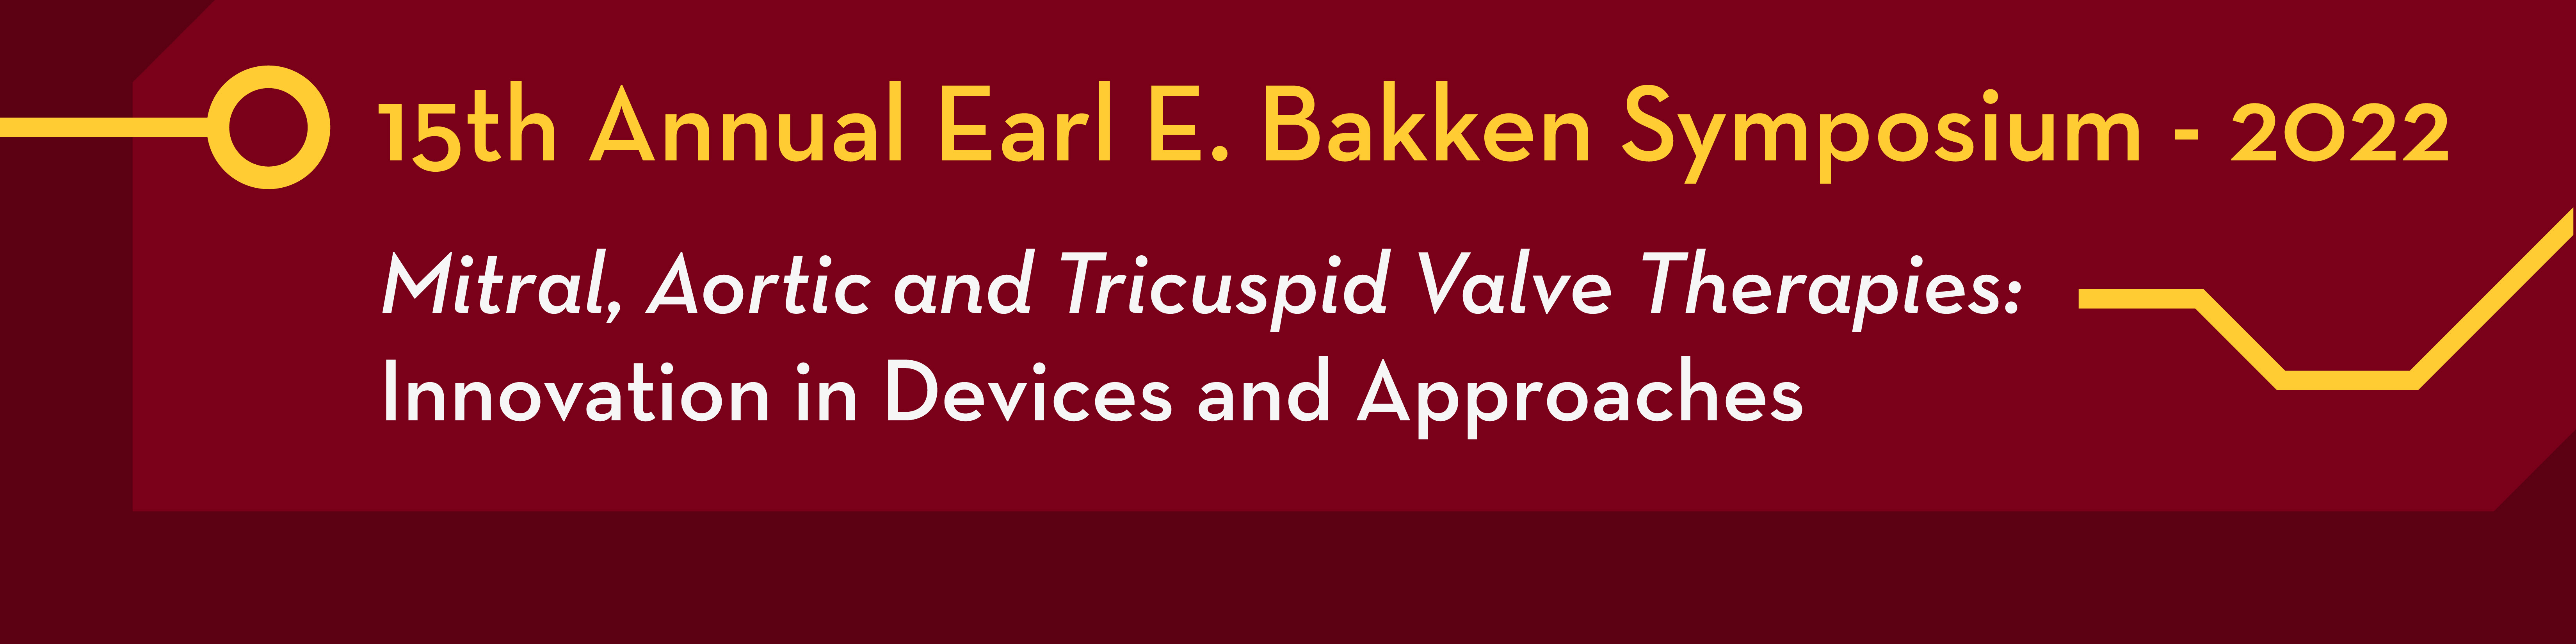 15th Annual Earl E Bakken Symposium: Mitral, Aortic and Tricuspid Valve Therapies: Innovation in Devices and Approaches Banner